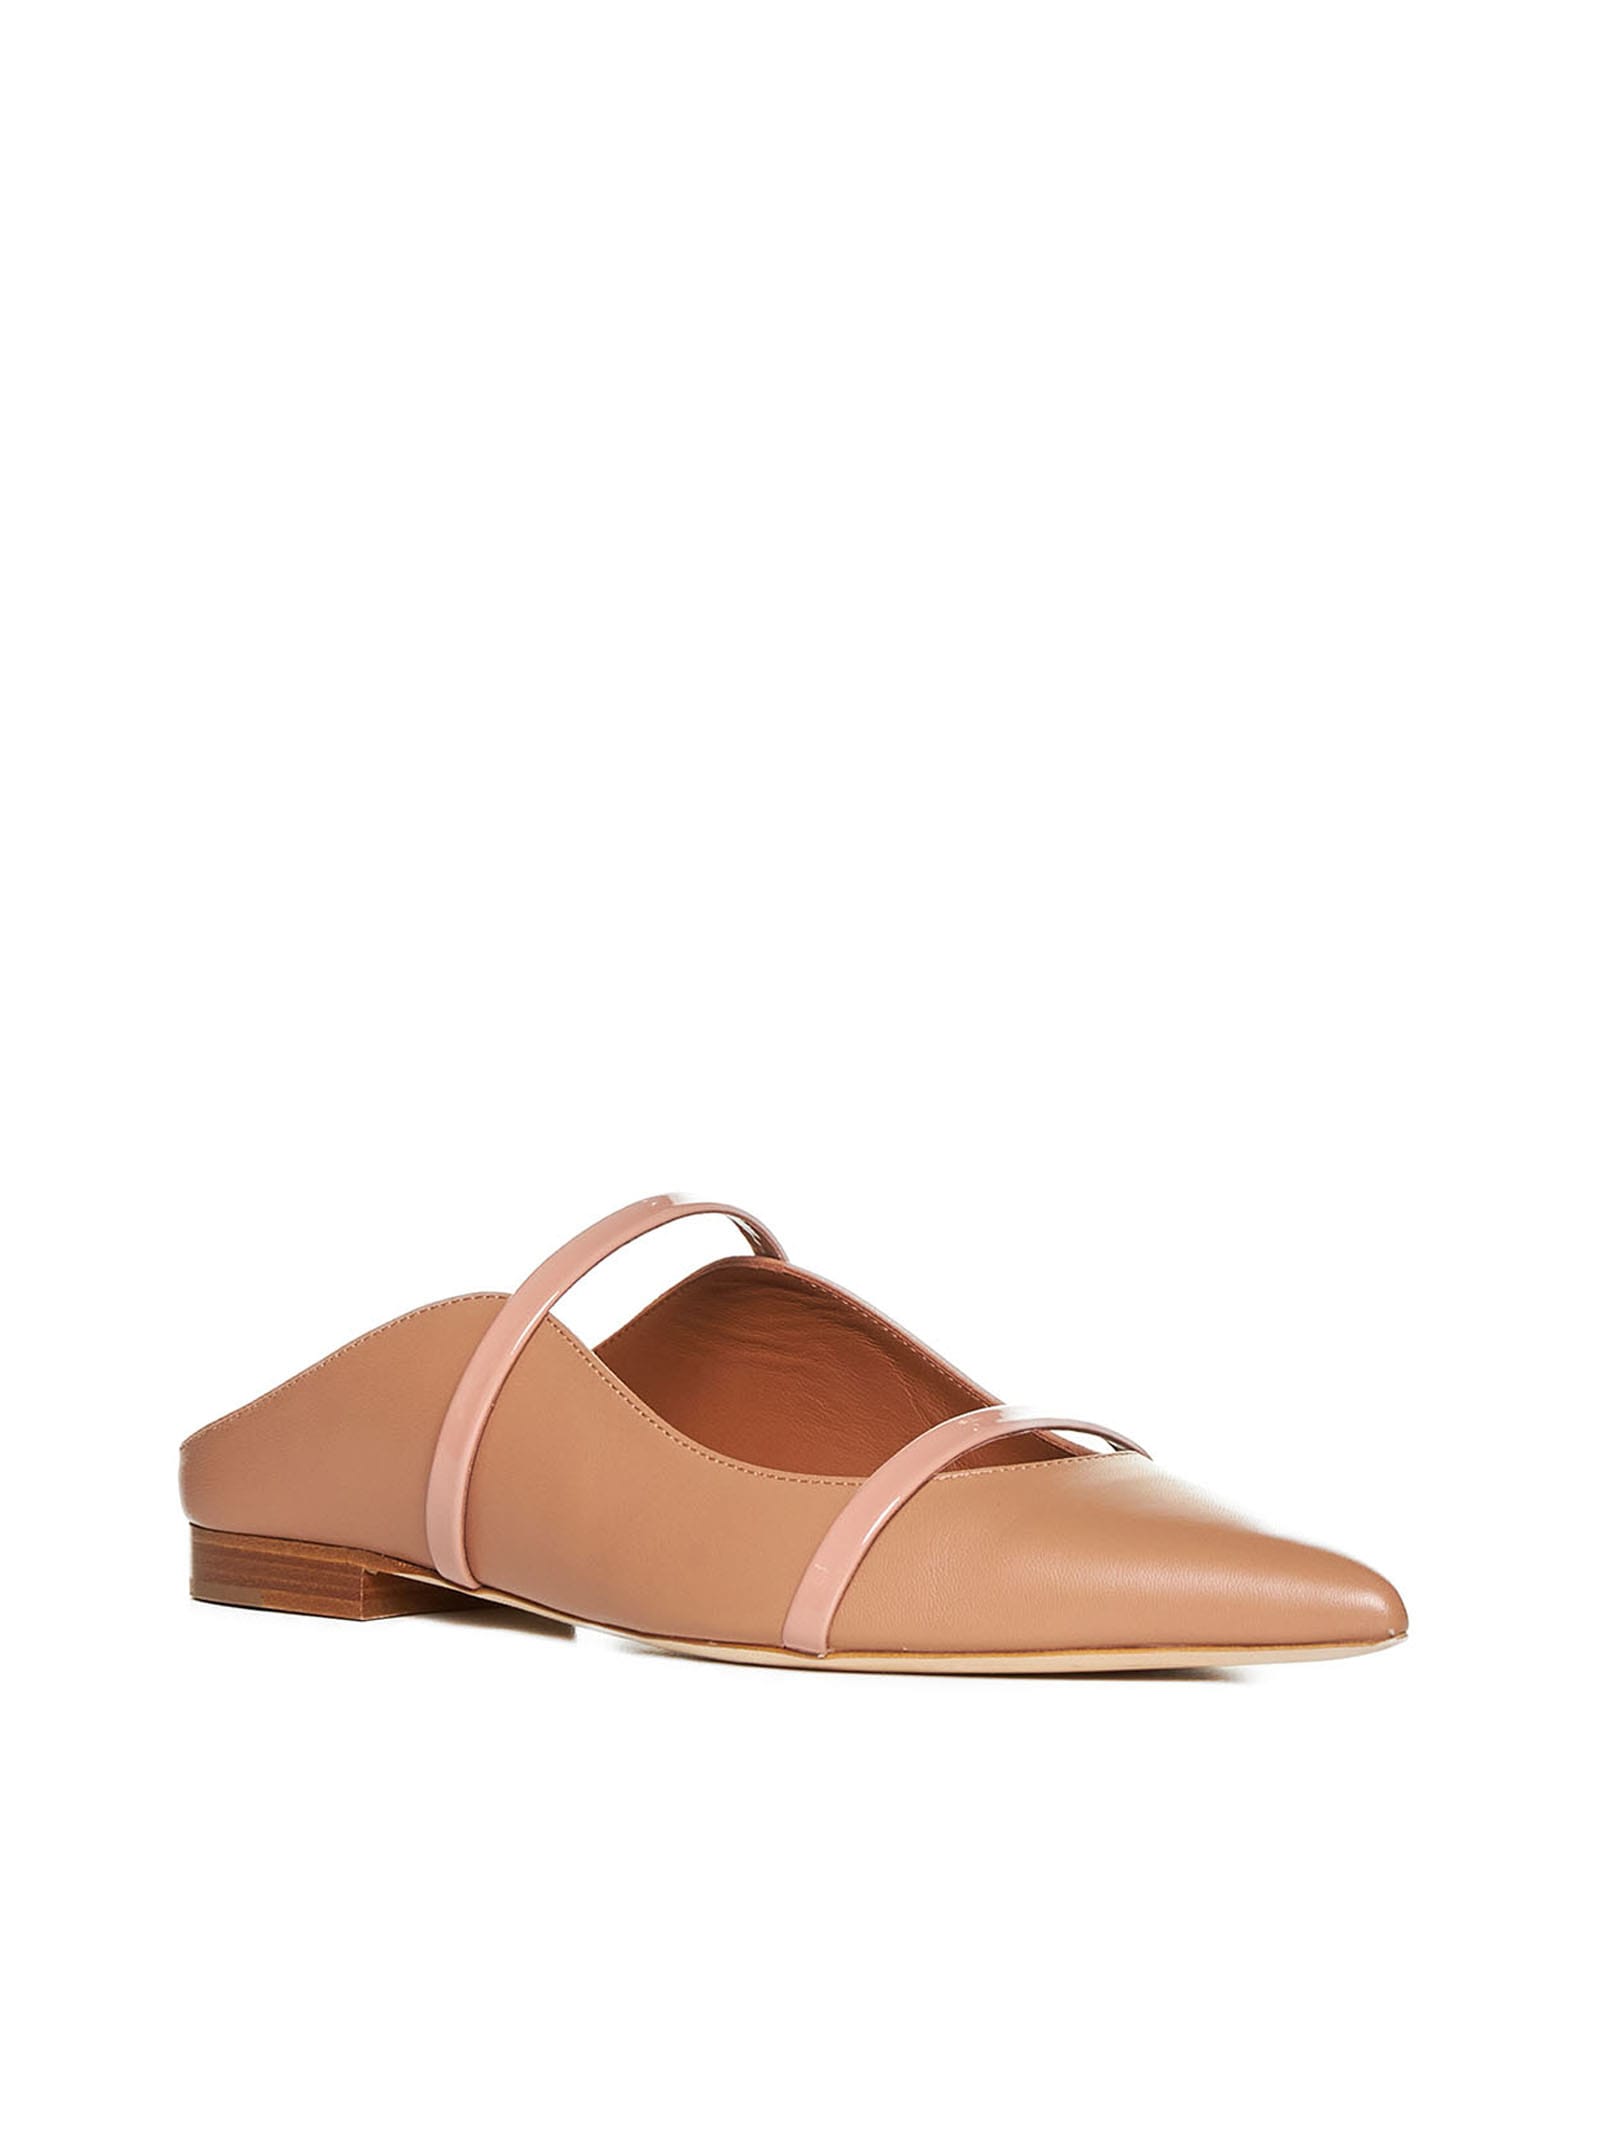 Shop Malone Souliers Sandals In Nude/blush